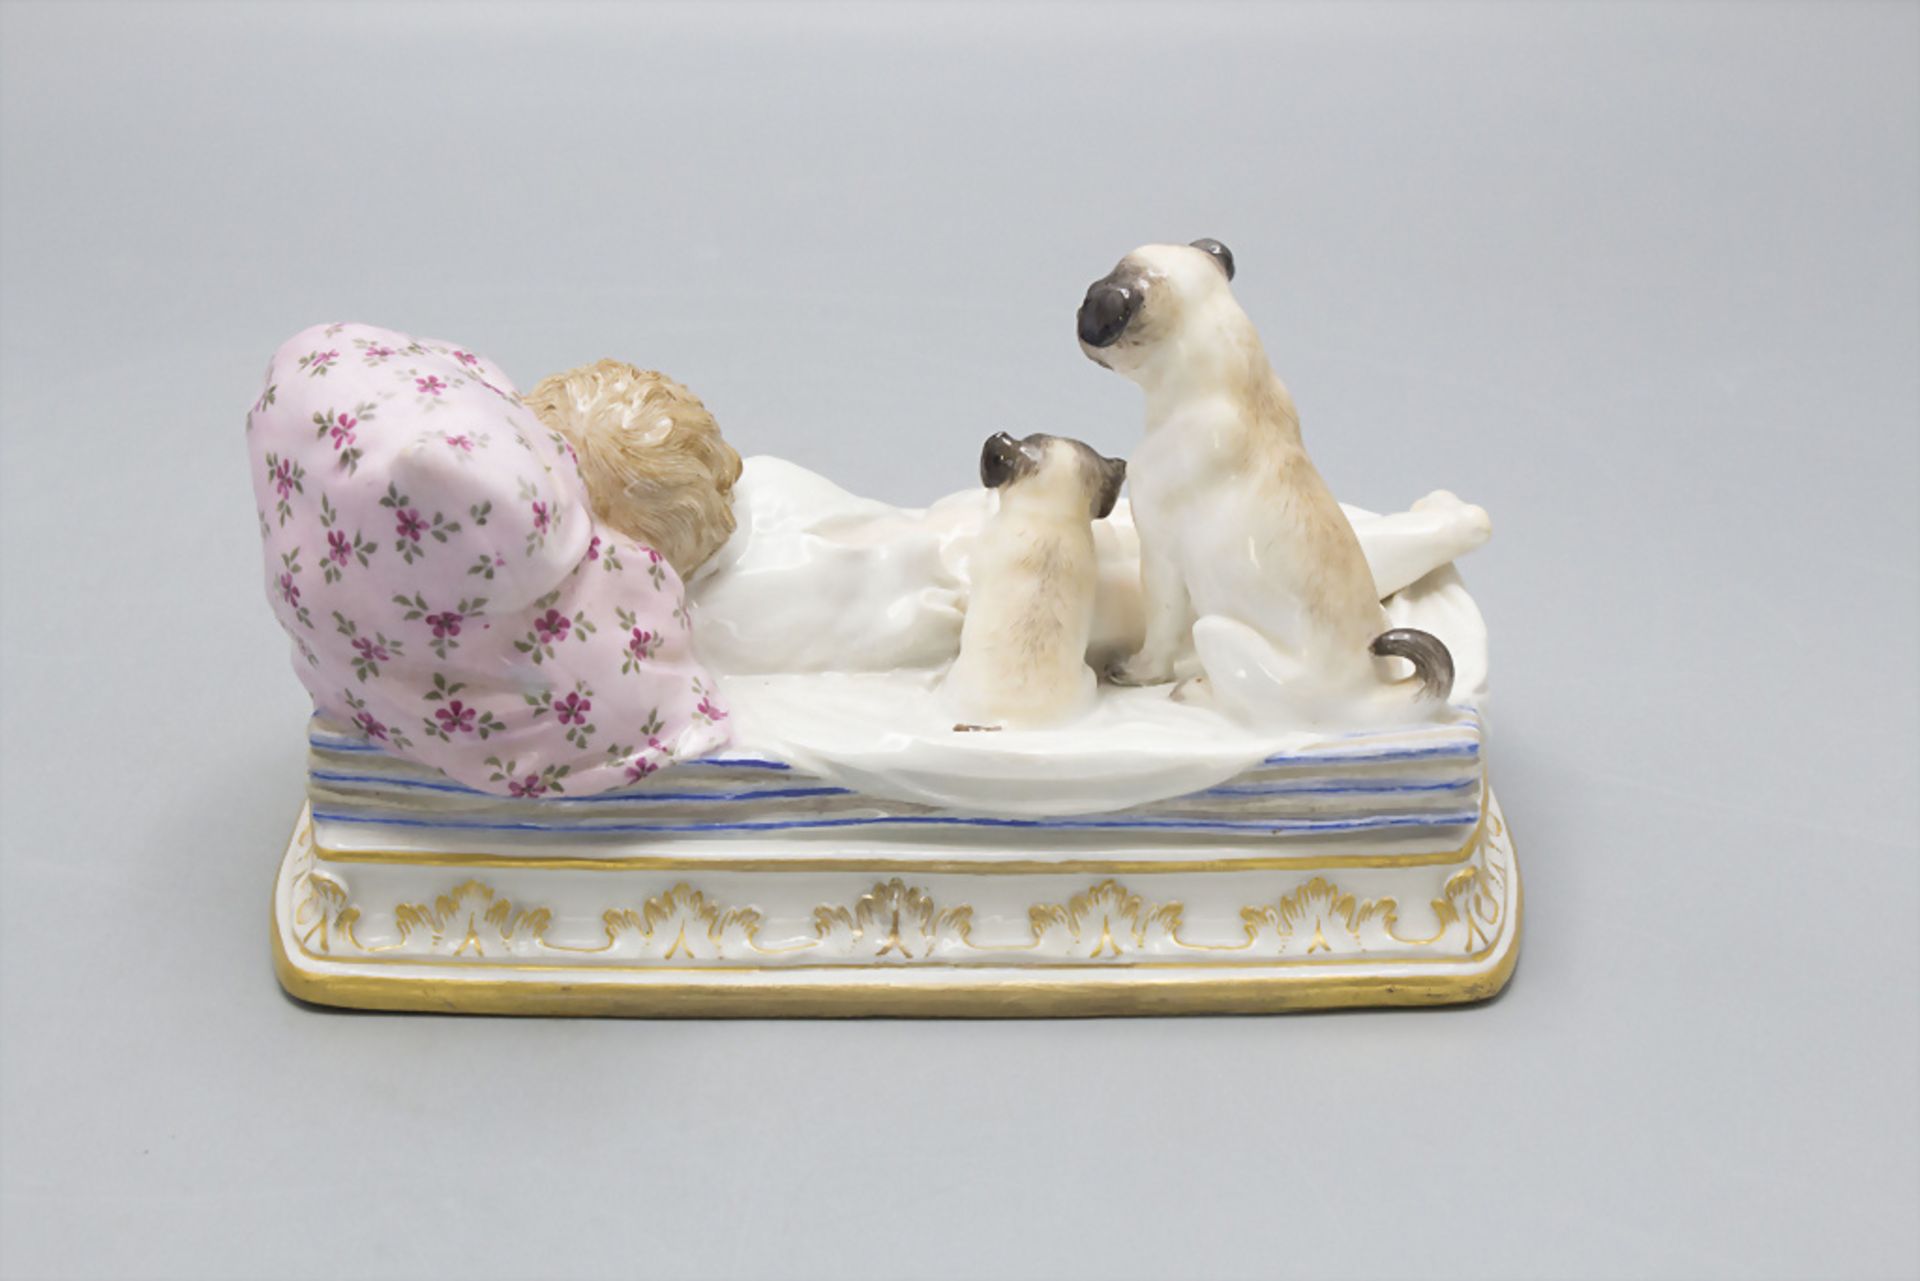 Kind mit 3 Mopshunden / A child with 3 pug dogs, Meissen, Ende 19. Jh. - Image 3 of 5